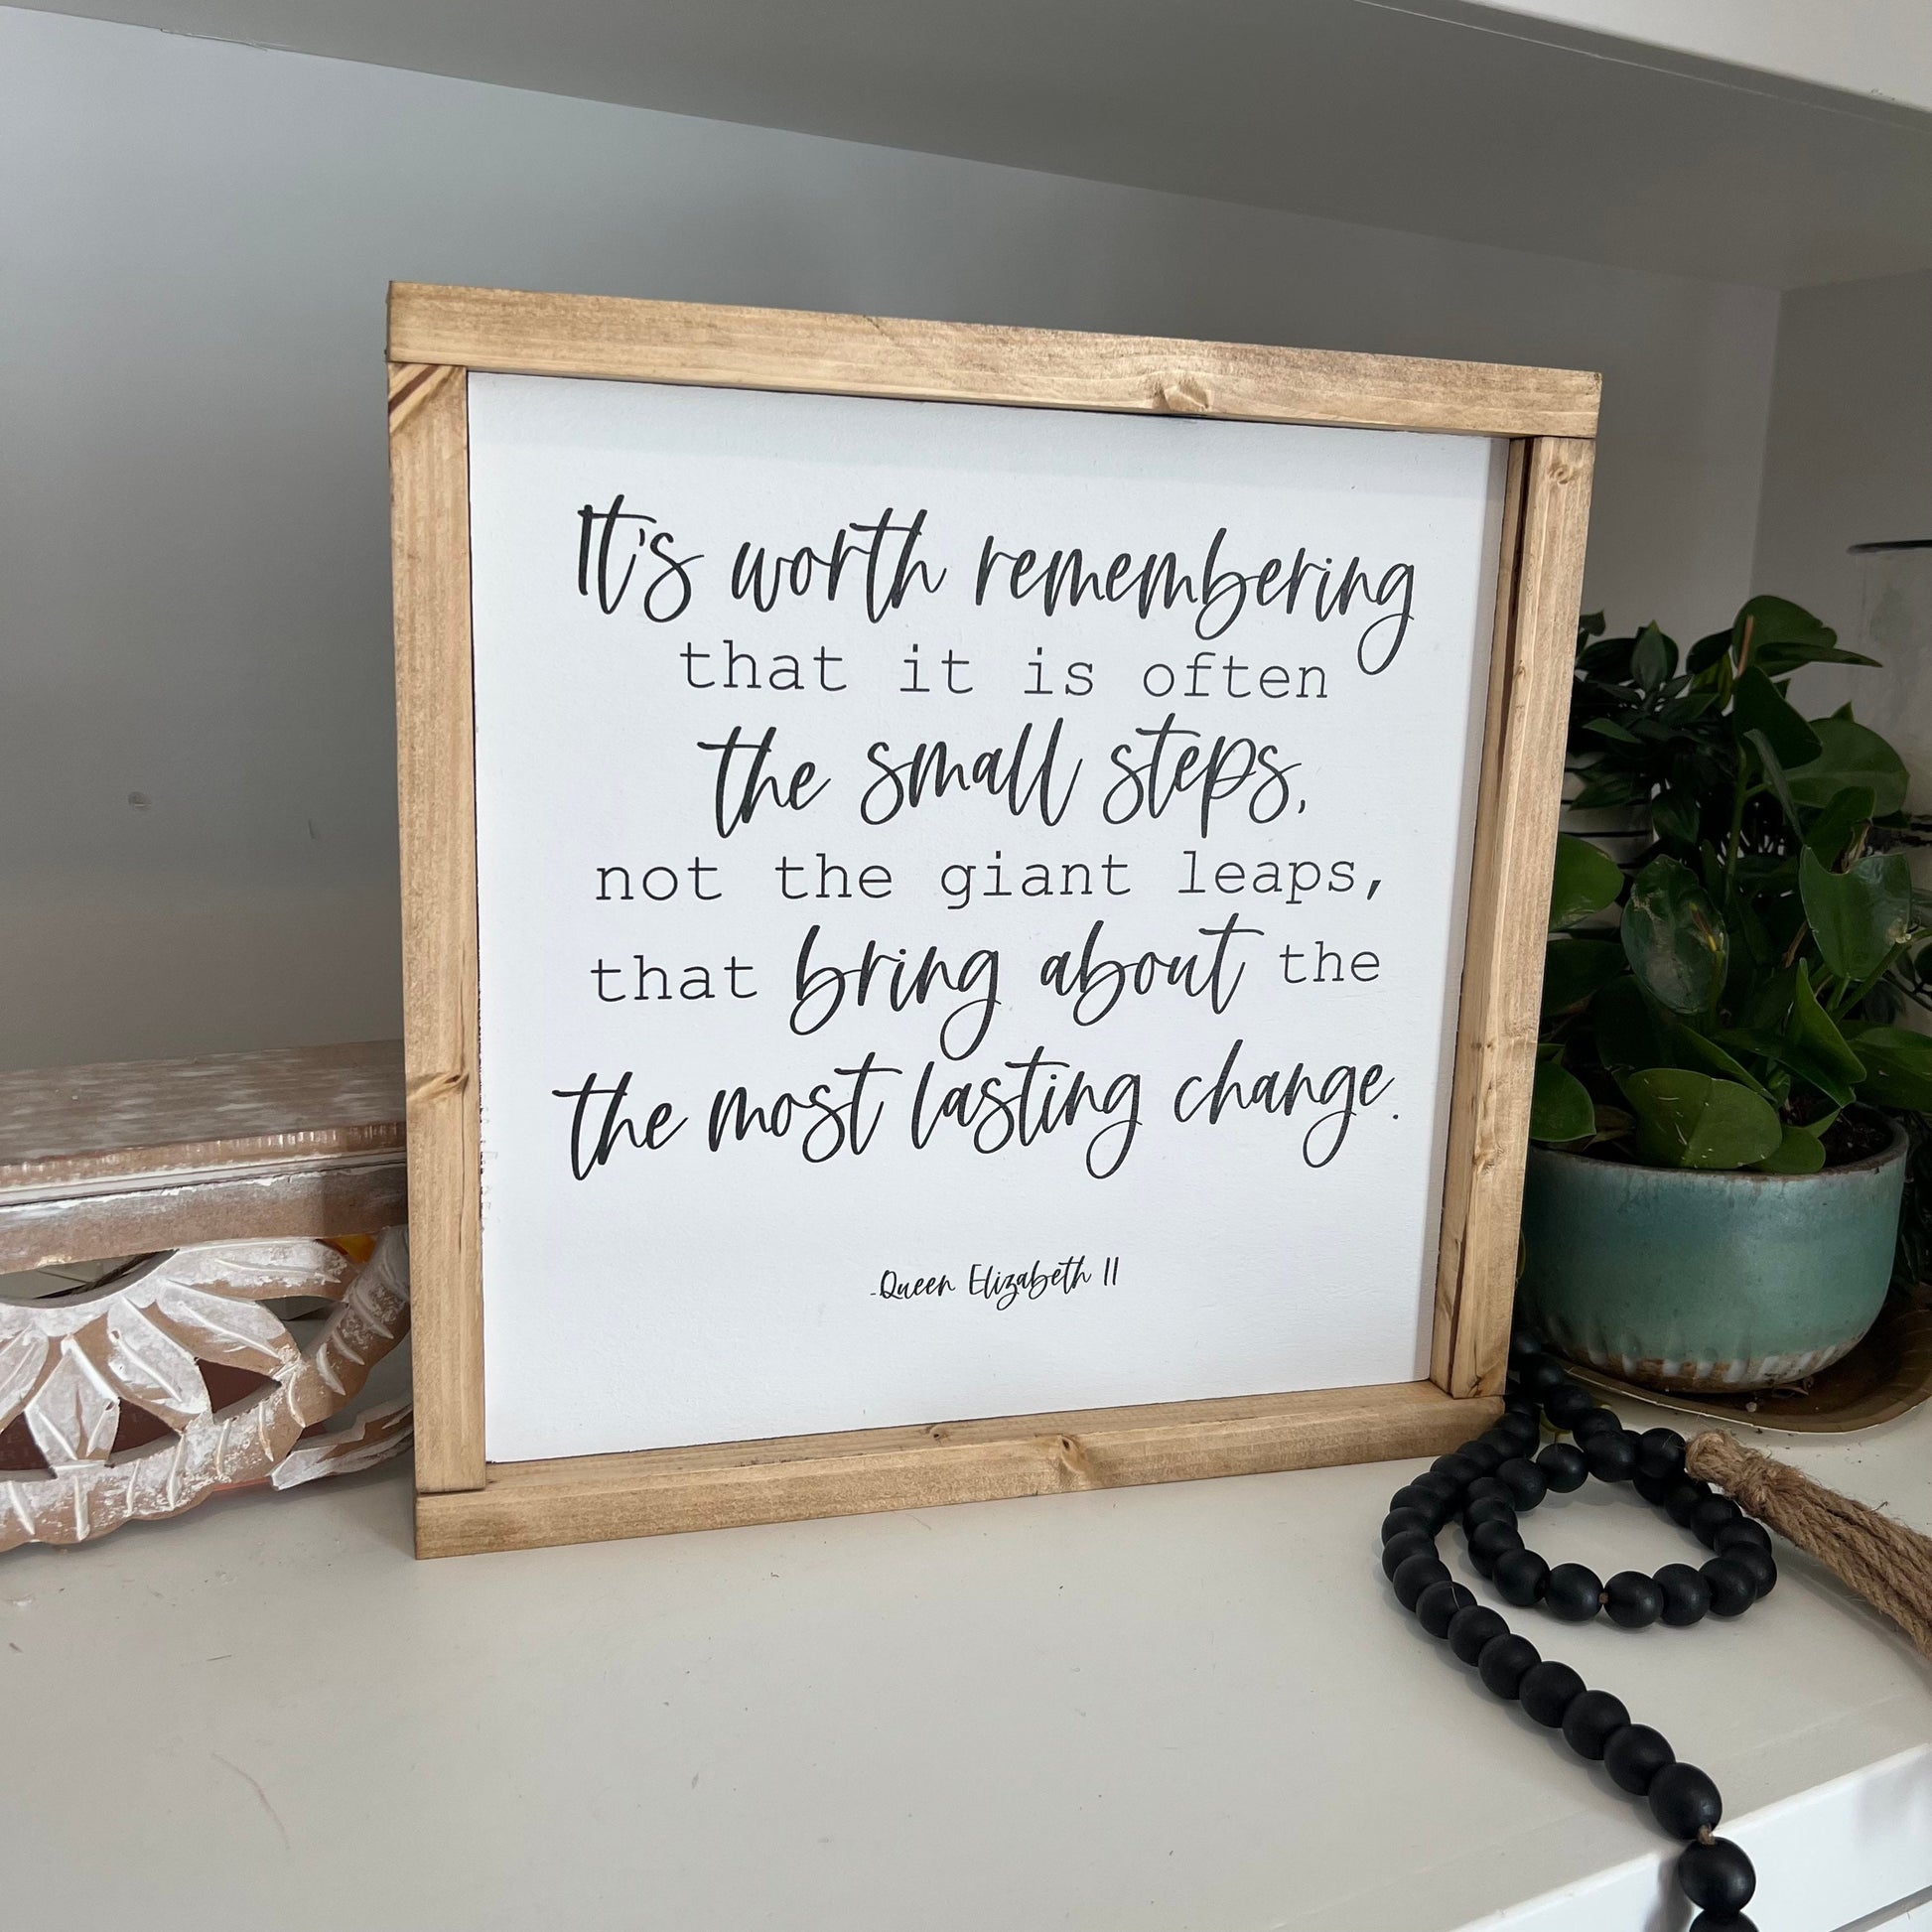 it is worth remembering * Queen Elizabeth II quote wood sign [FREE SHIPPING!]